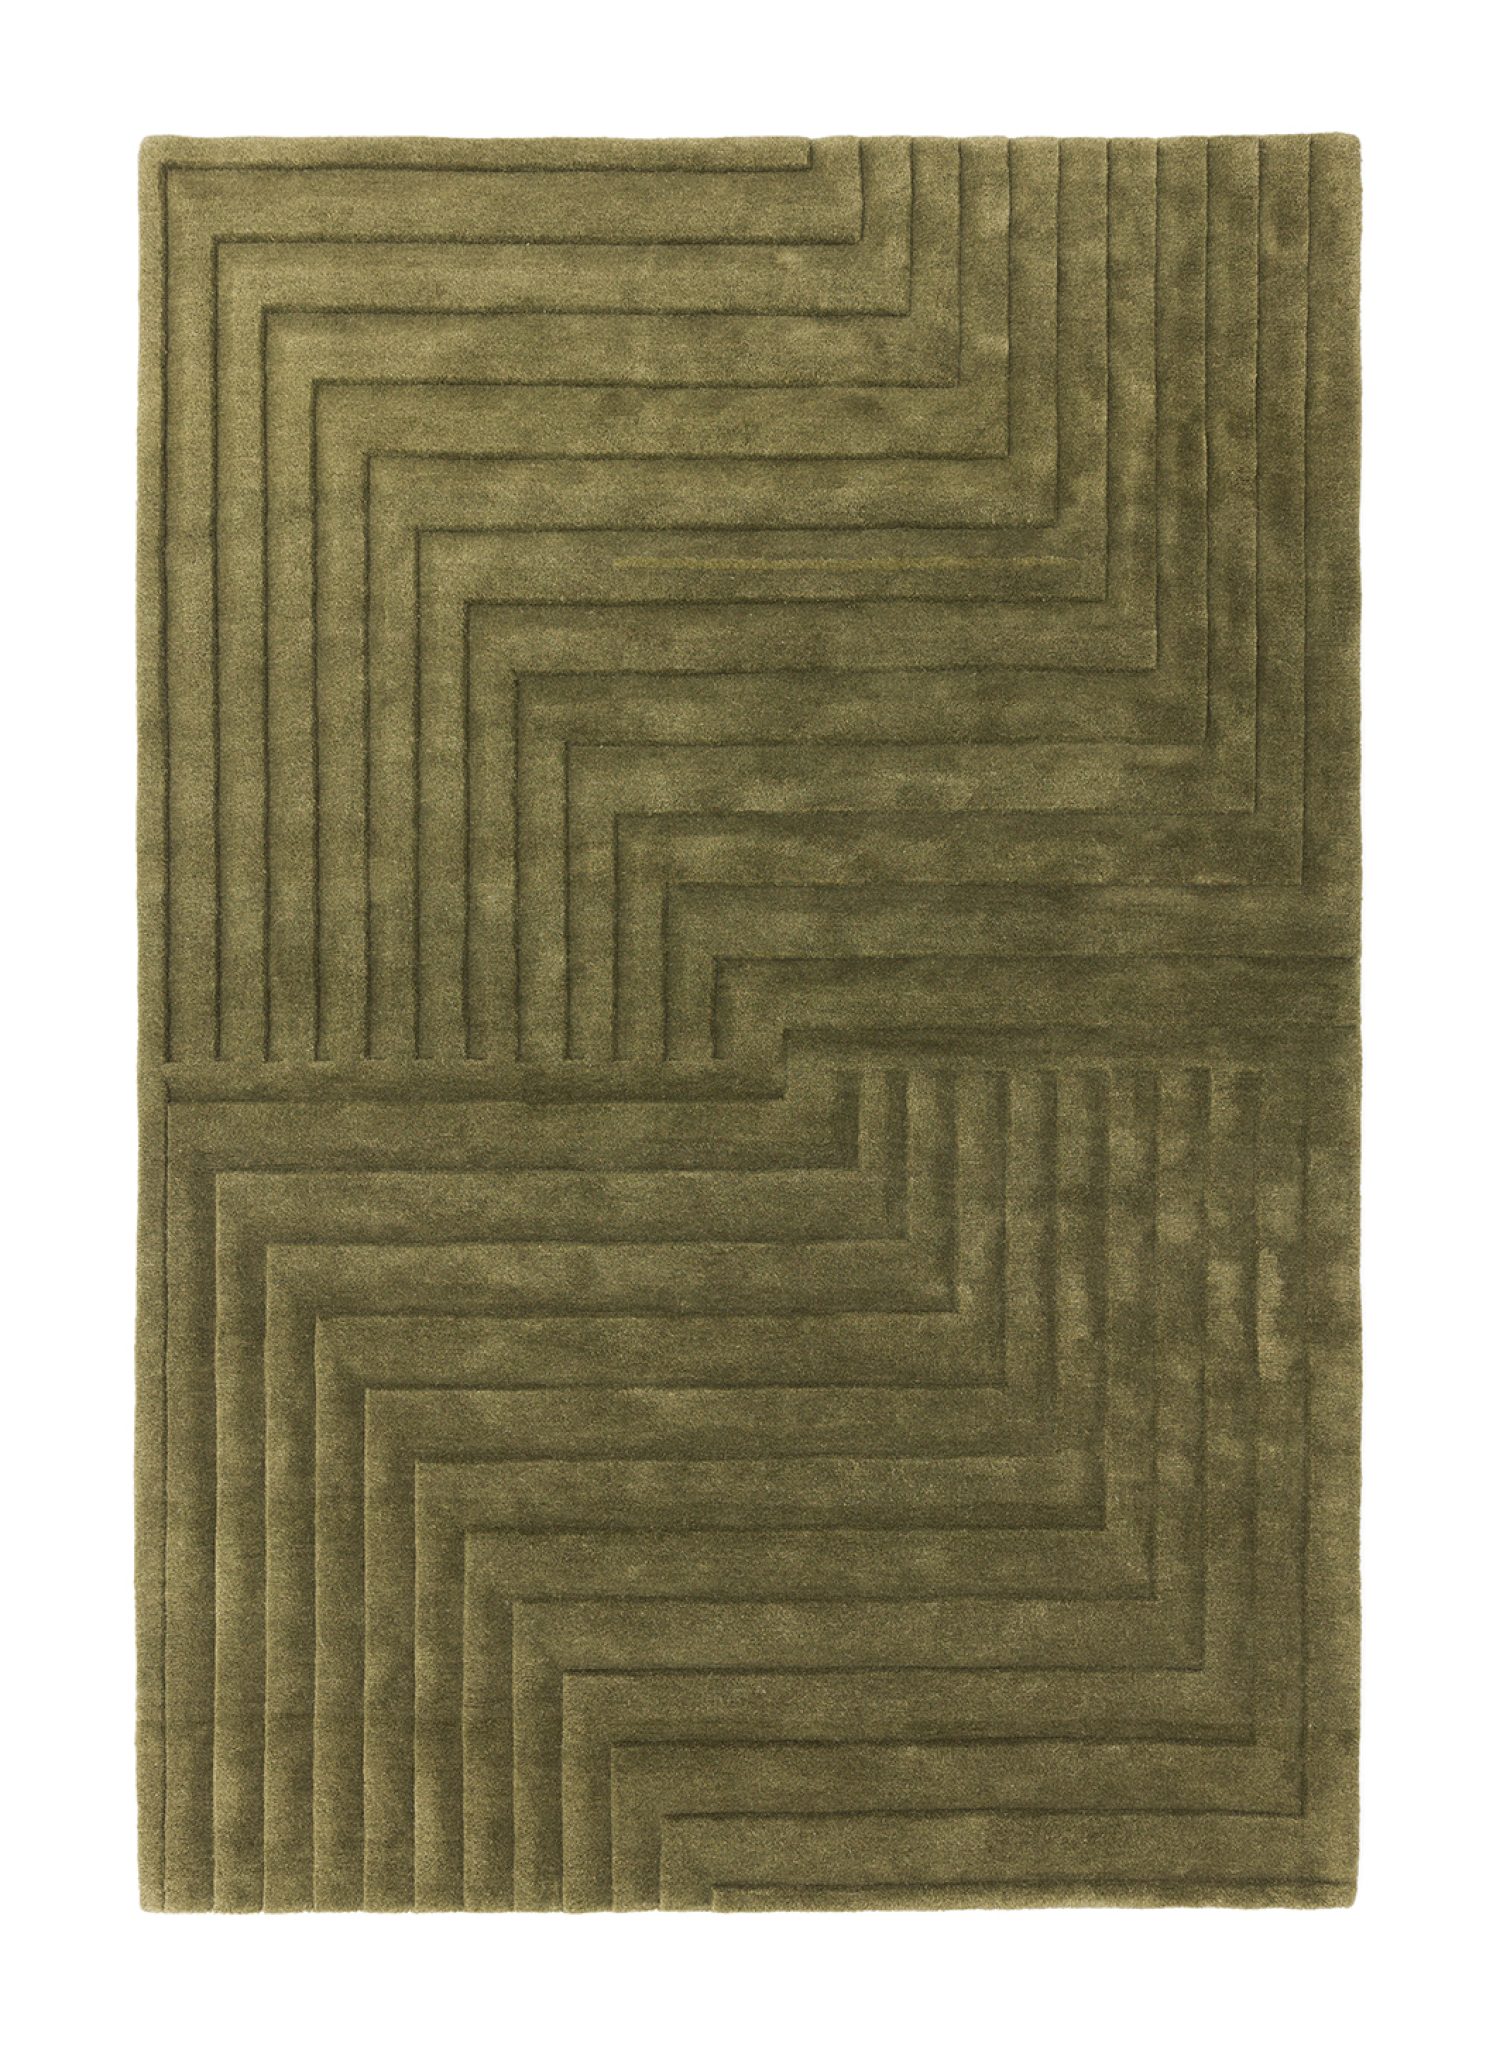 Morf Green Rug By Floor Story, Green And Brown Rugs Uk